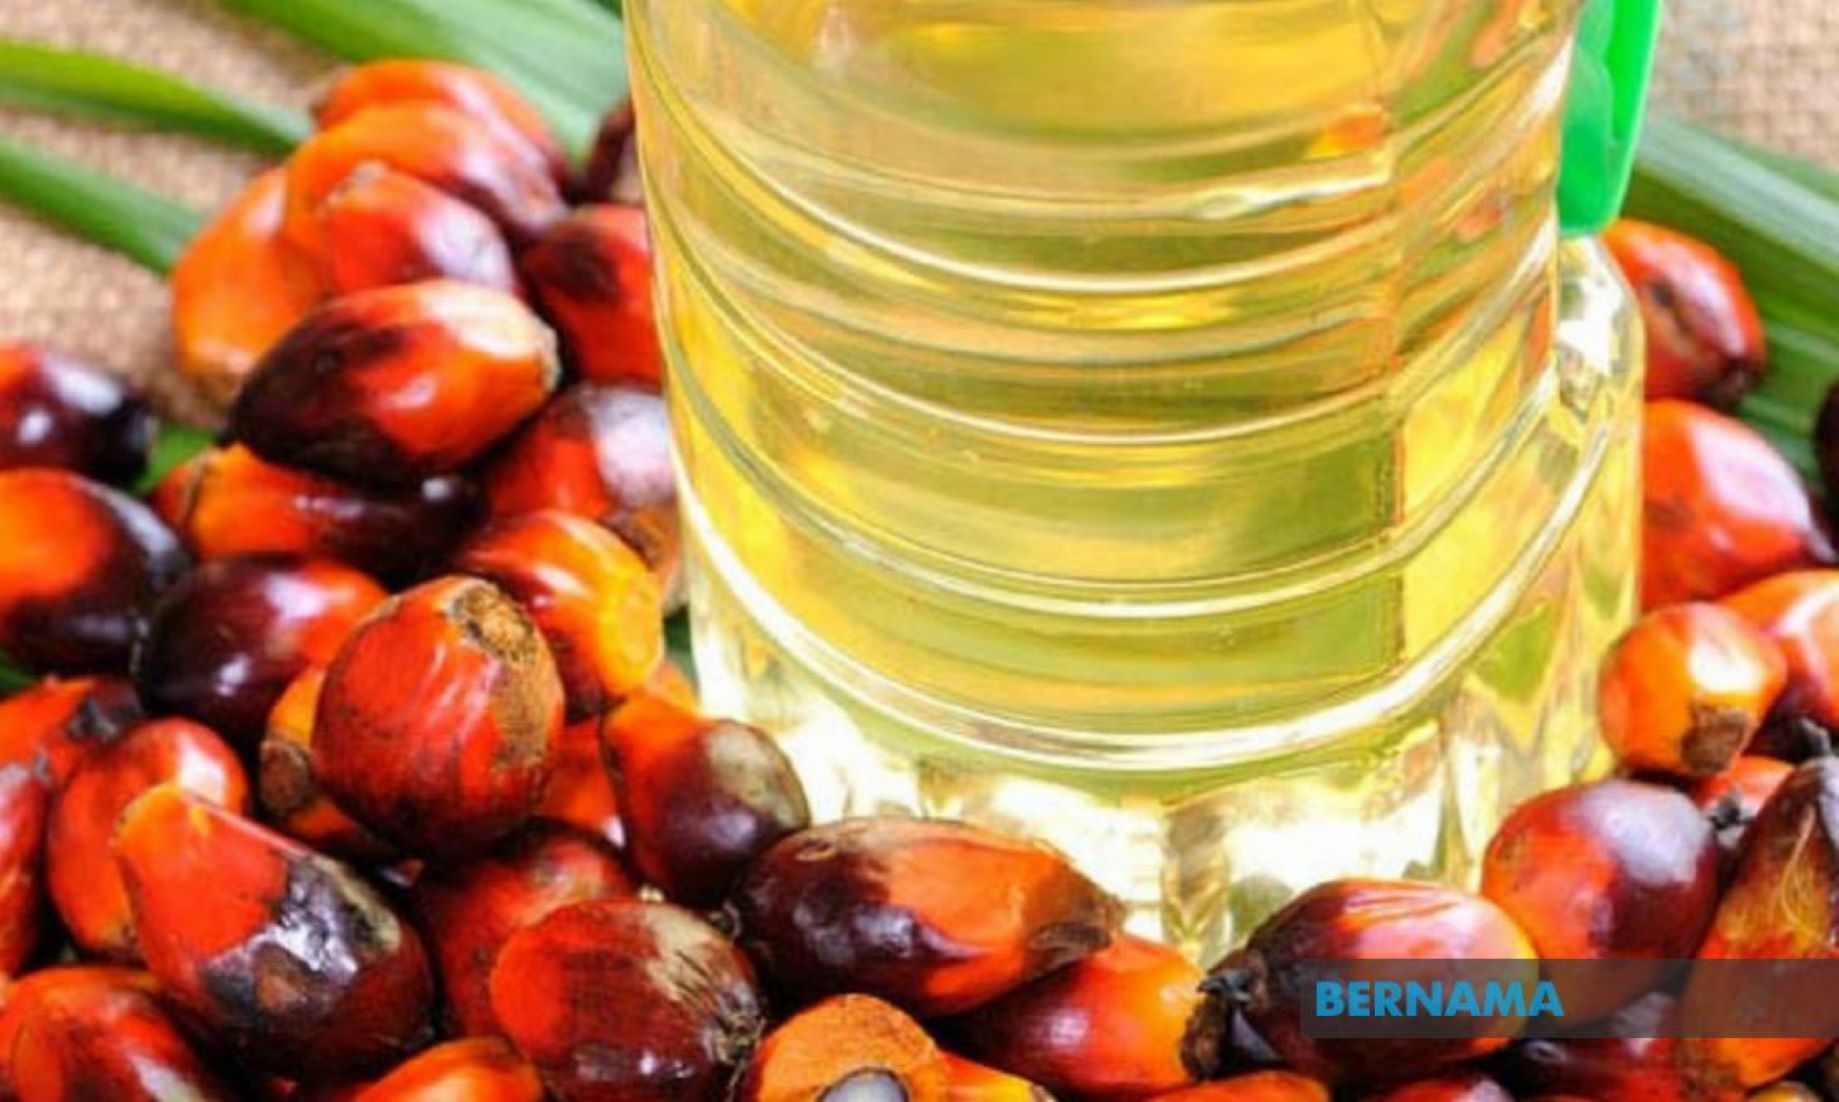 Analysts Expect Malaysia’s Crude Palm Oil Prices To Ease This Year